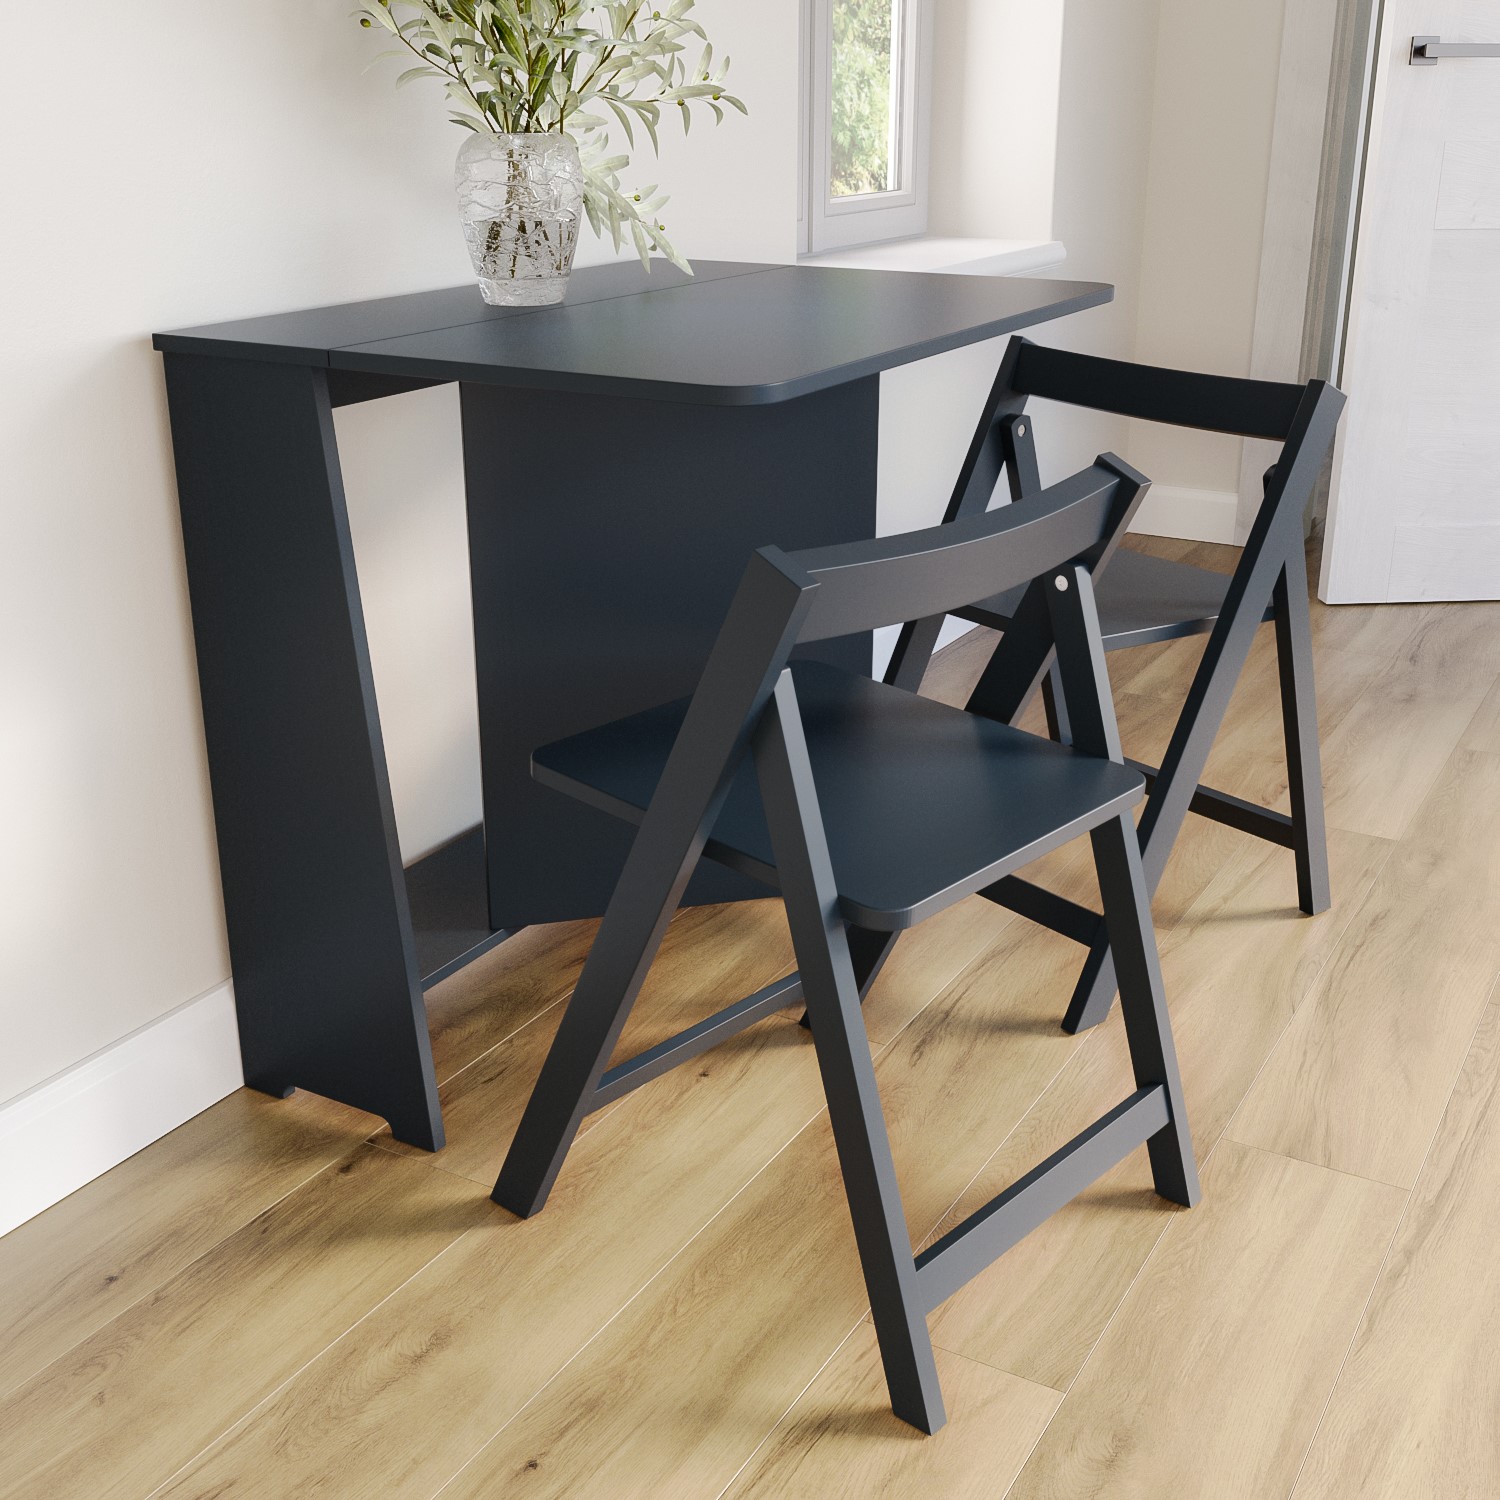 Read more about Navy space saving drop leaf dining table and chairs seats 2 kylee